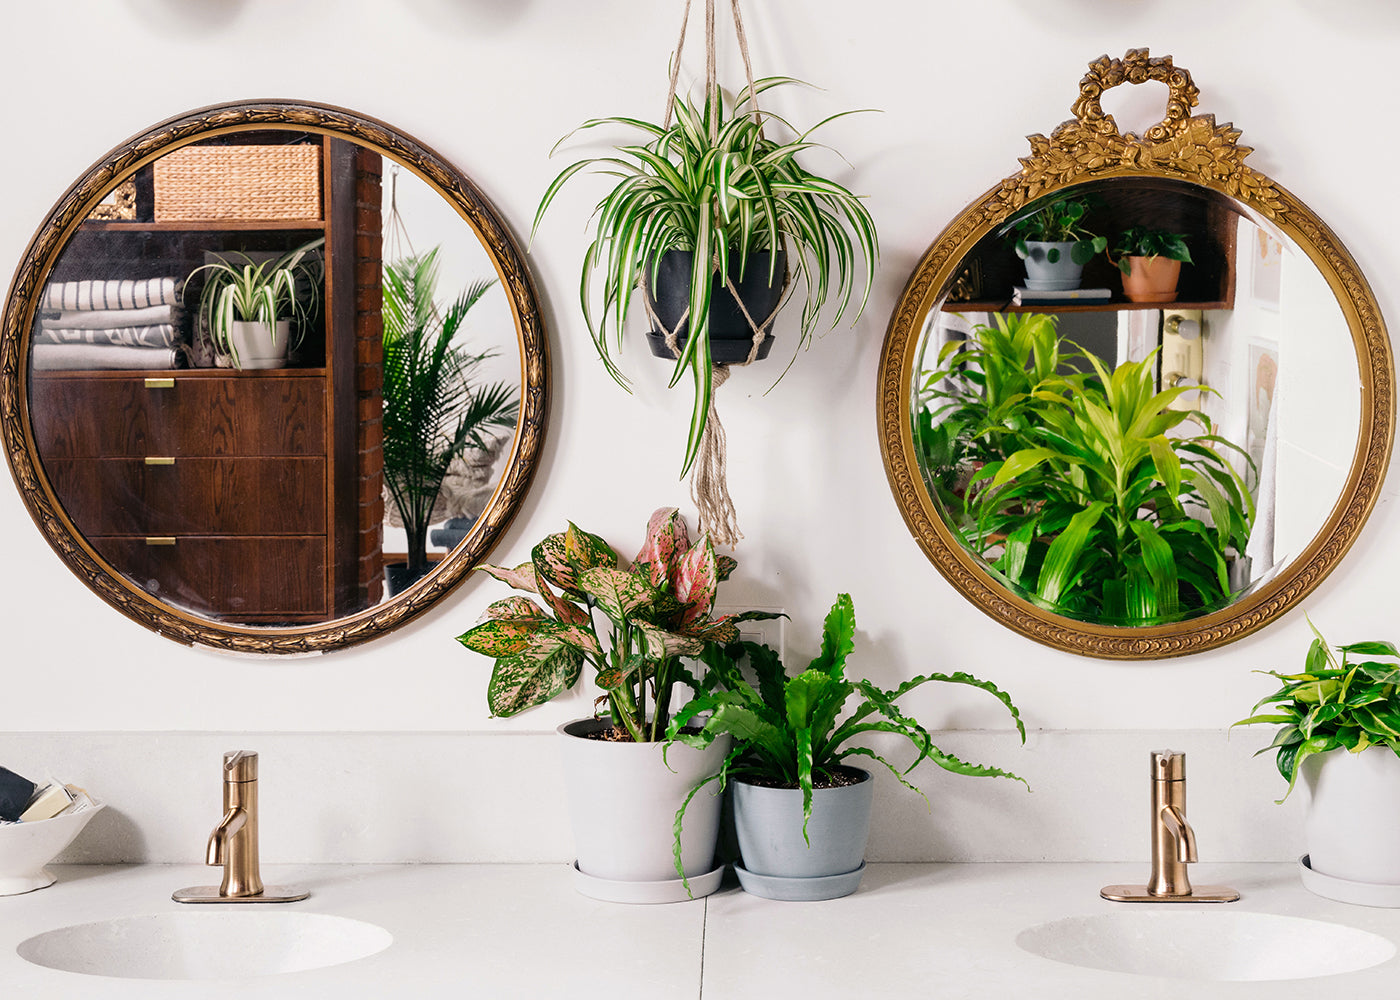 A complete guide to decorating your bathroom with plants – and how to take care of them!